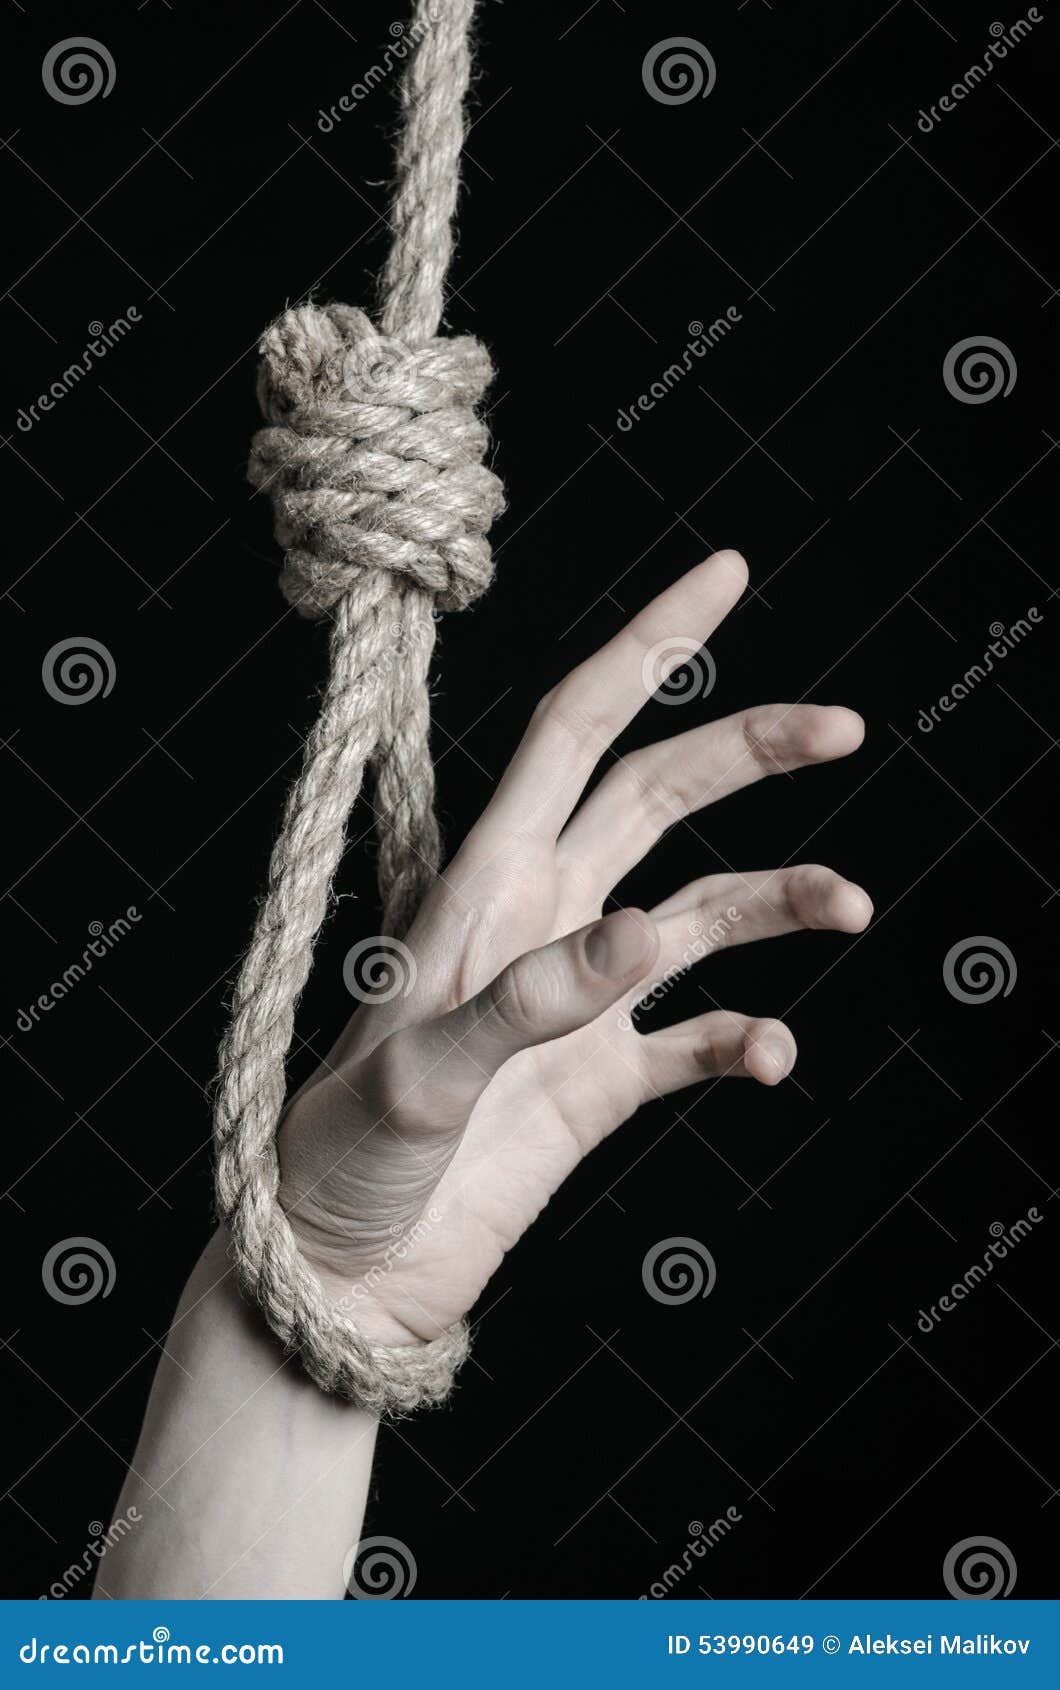 Suicide and Depression Topic: Human Hand Hanging on Rope Loop on a Black  Background Stock Image - Image of hold, despair: 53990649